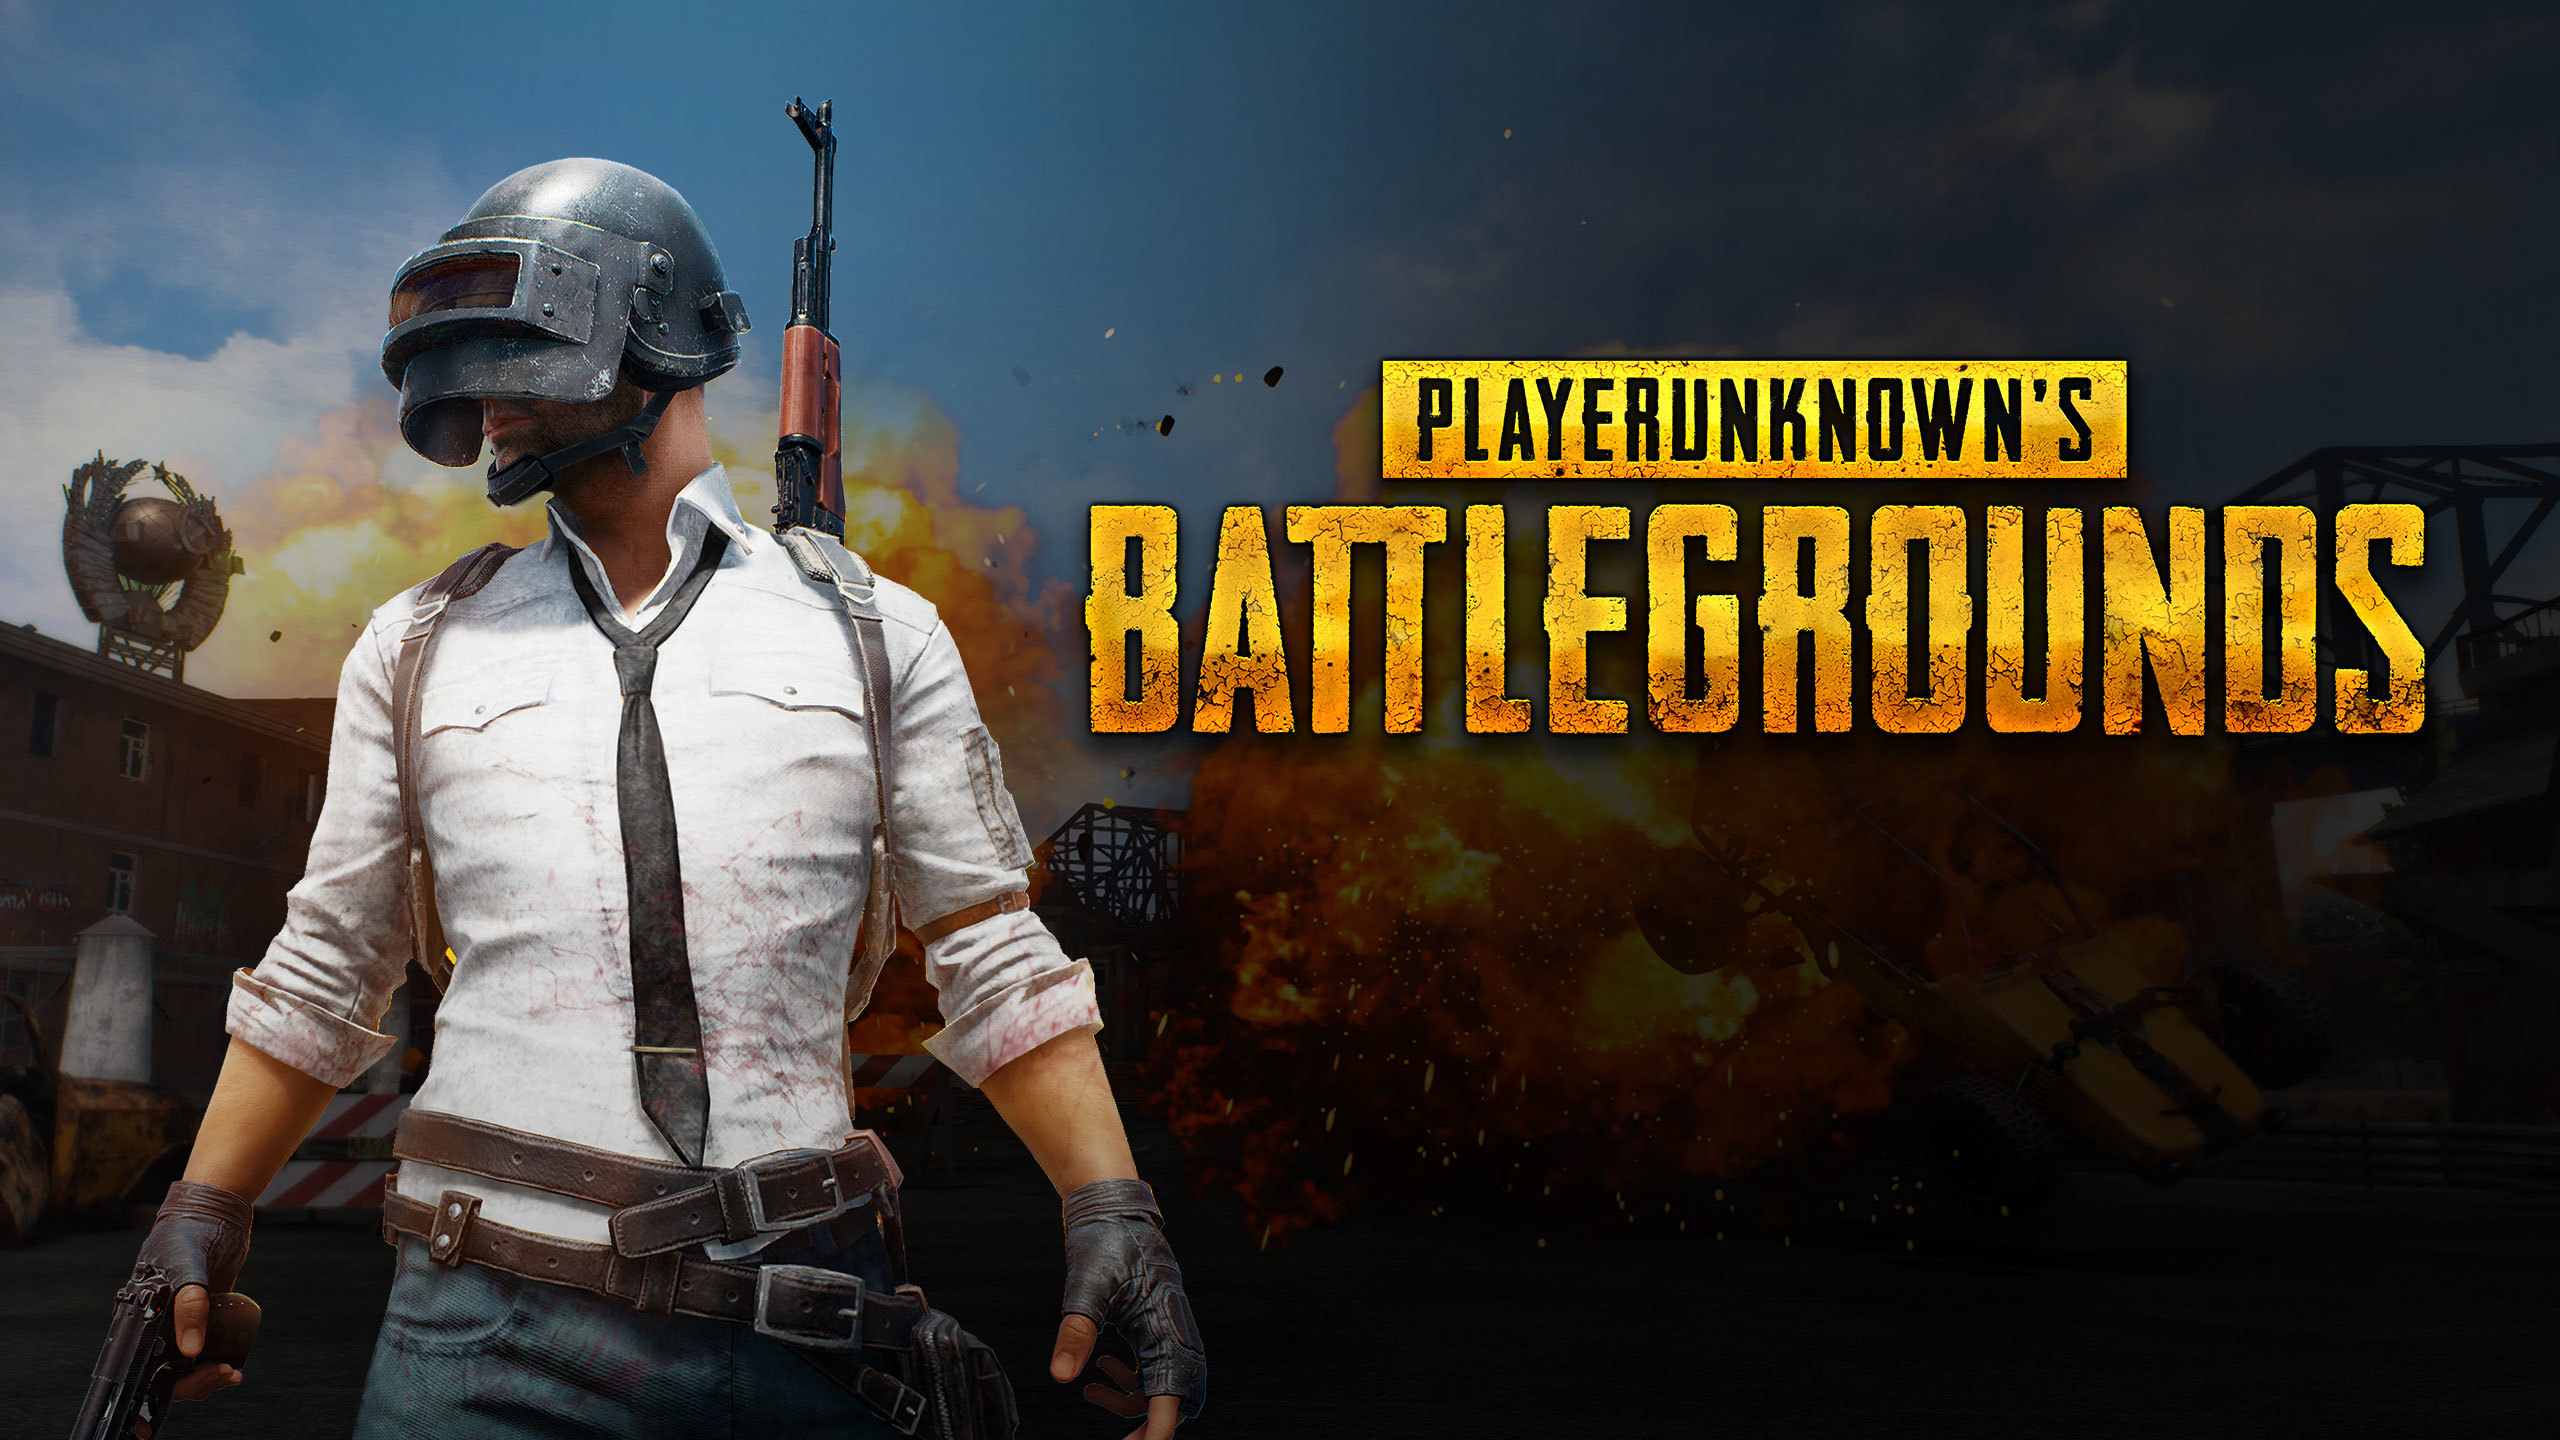 PLAYERUNKNOWNS BATTLEGROUNDS Wallpapers, Pictures, Images